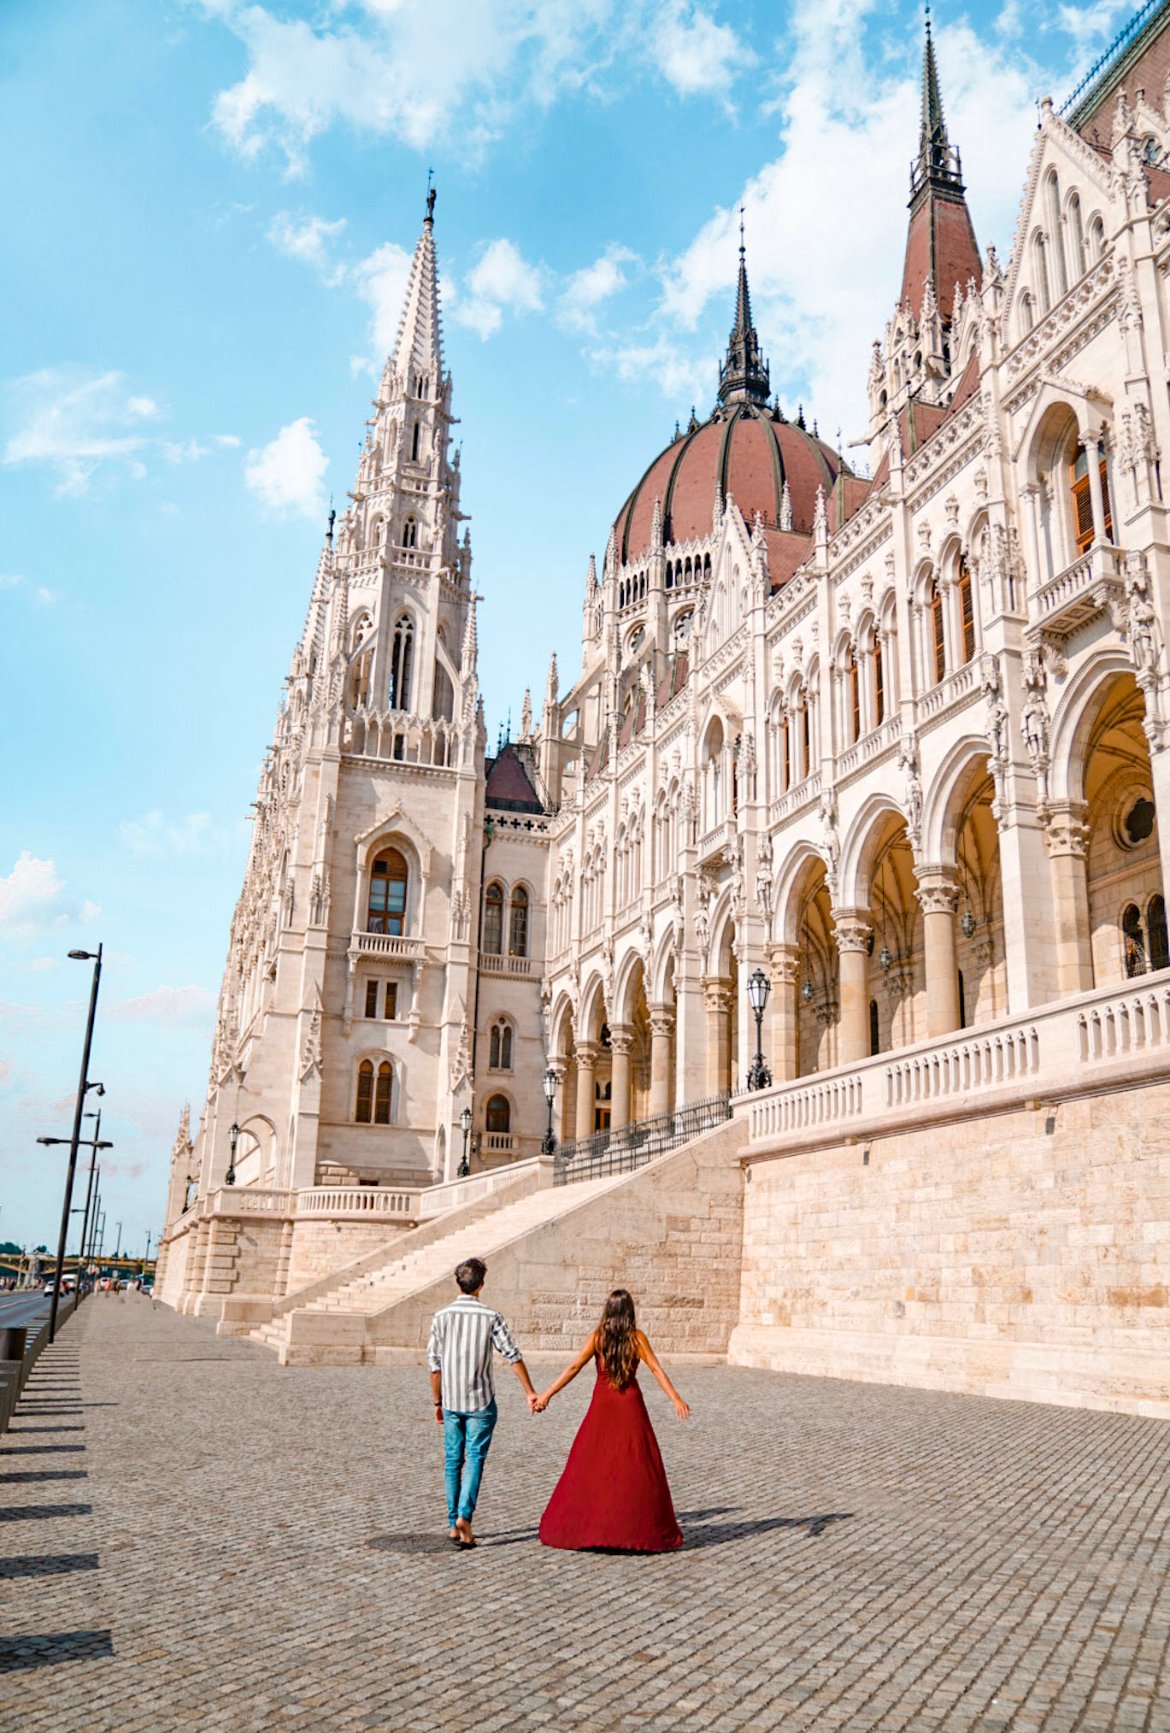 Hungarian Parliament, 10 top things to do in Budapest